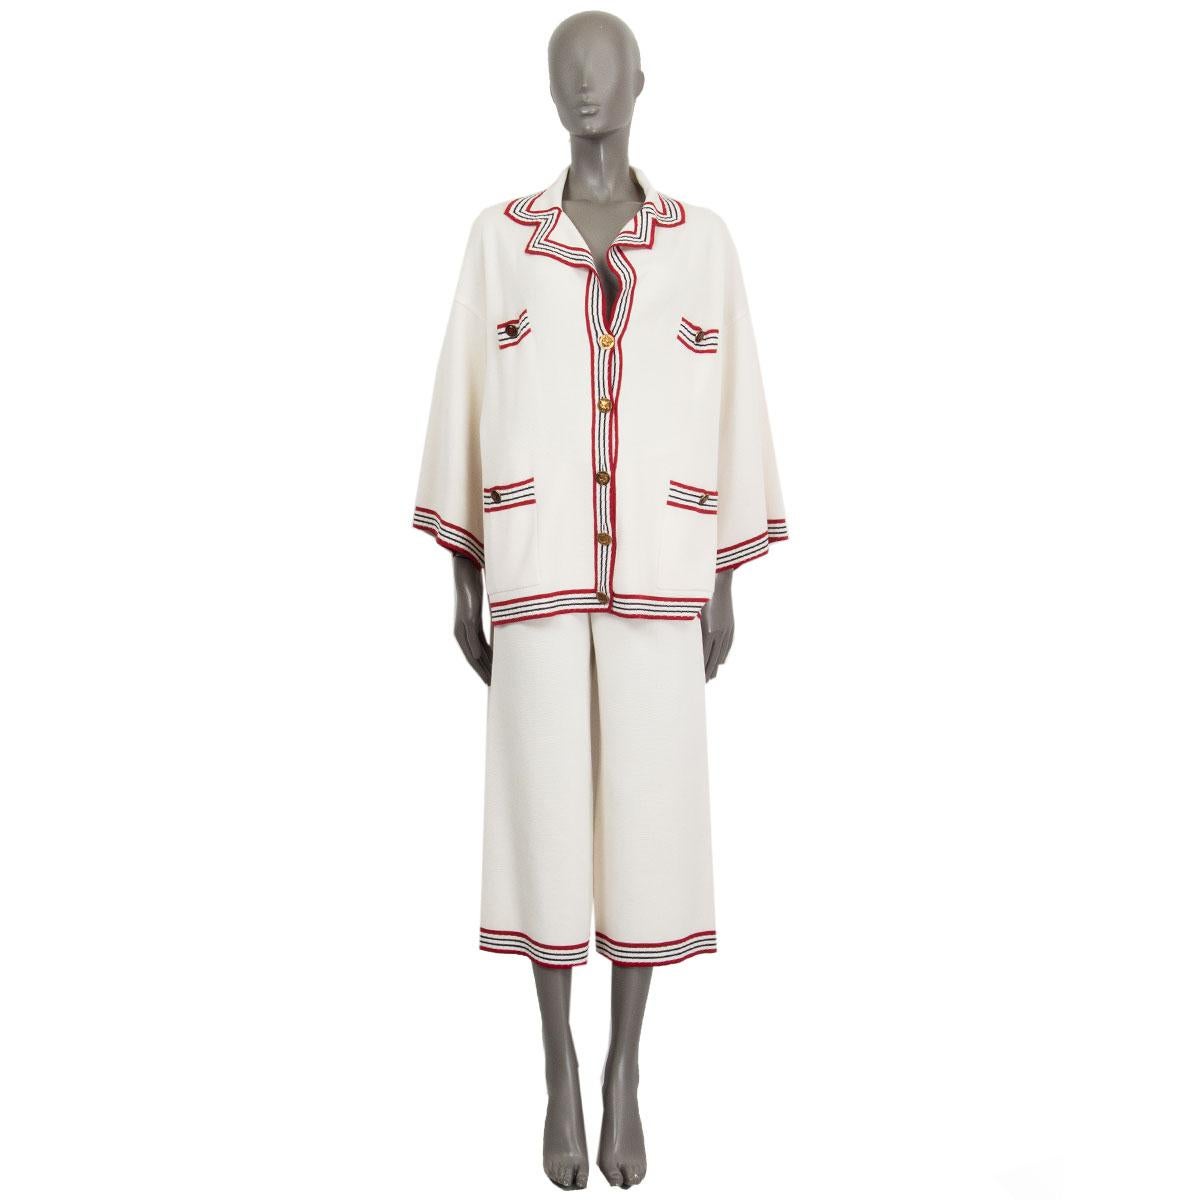 100% authentic Gucci pre-fall 2018 oversized cardigan in cream, red and midnight bllue silk (59%) and cotton (41%). With a striped hemline, dropped shoulder, two ticket pockets, two patch pockets and round gold, midnight blue and red GG buttons.